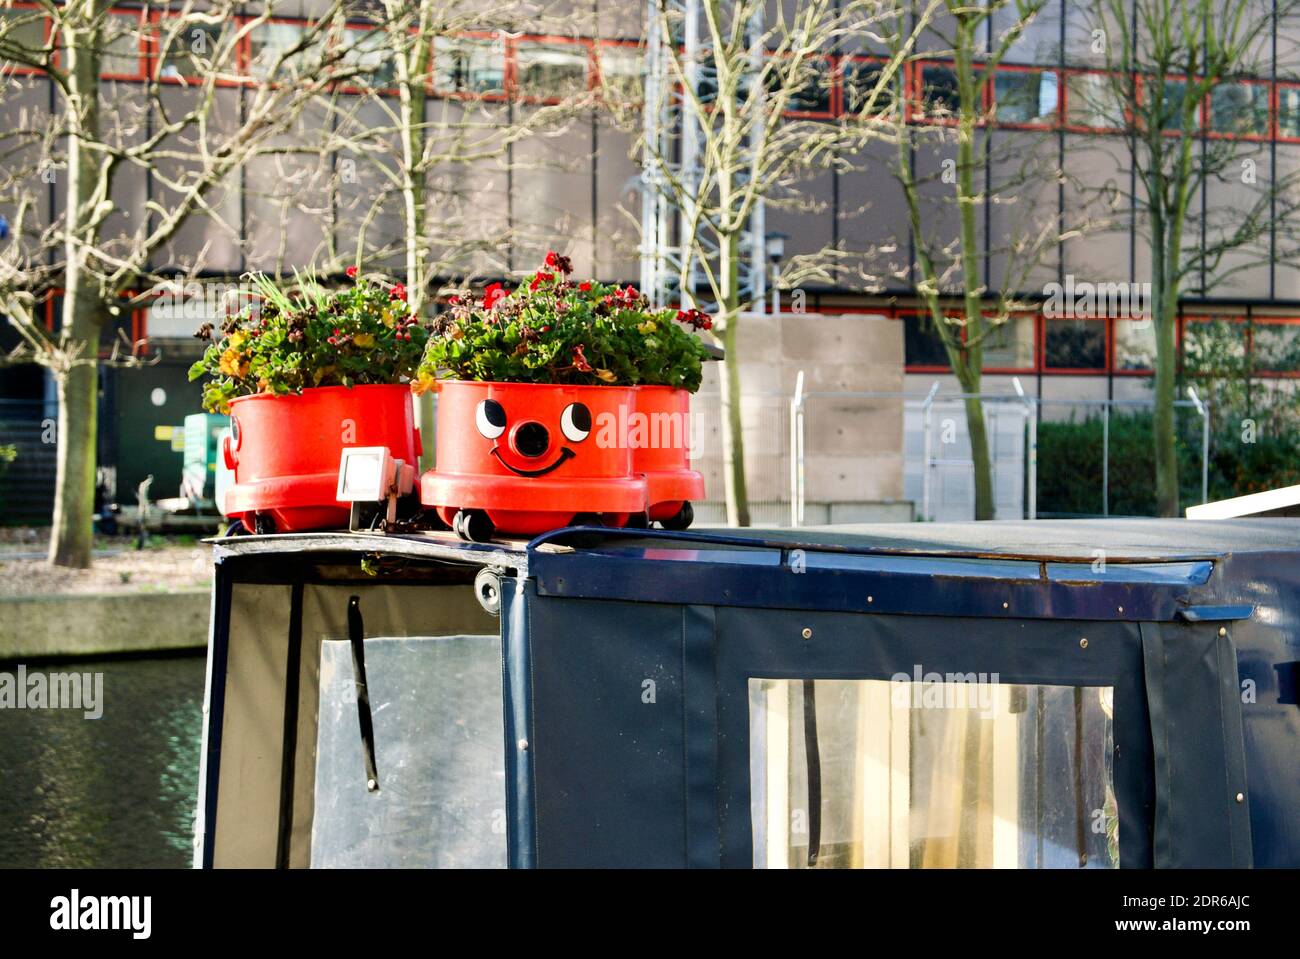 Urban gardening on the roof of a narrowboat on Regent's Canal, London. Vegetables and flowers being grown for improved mental health. Stock Photo